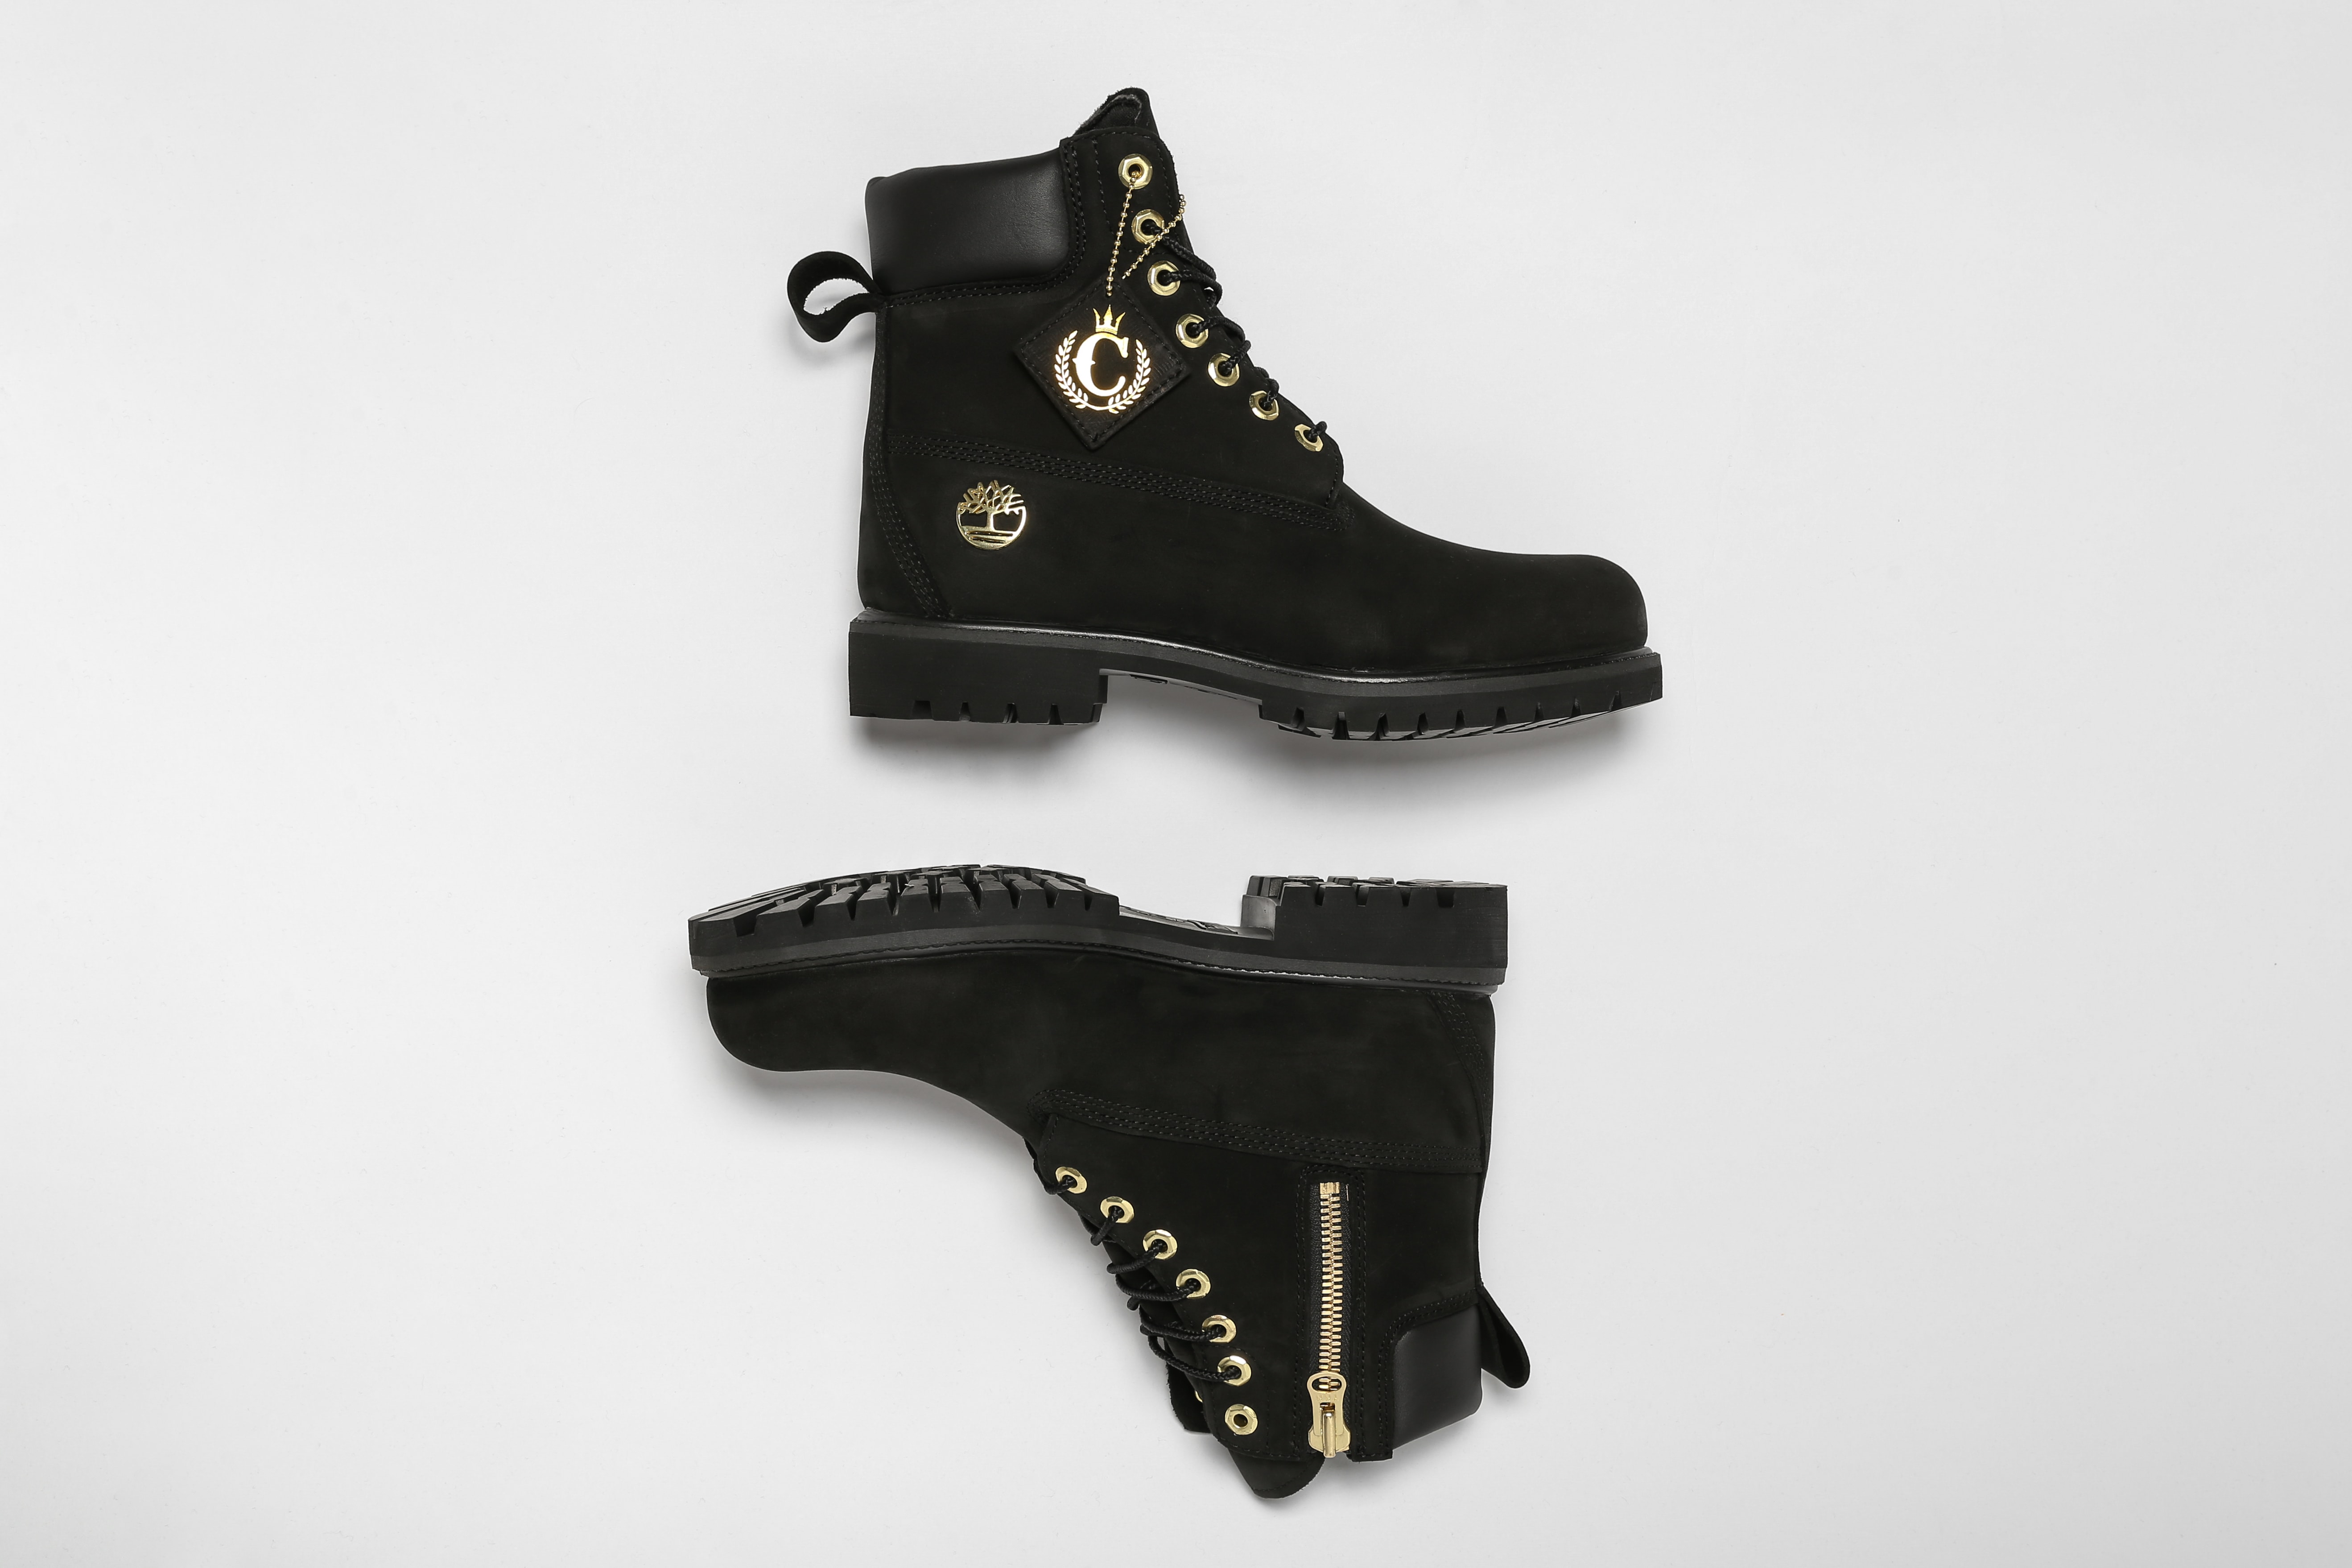 Timberland Culture Kings Black and Gold Boot